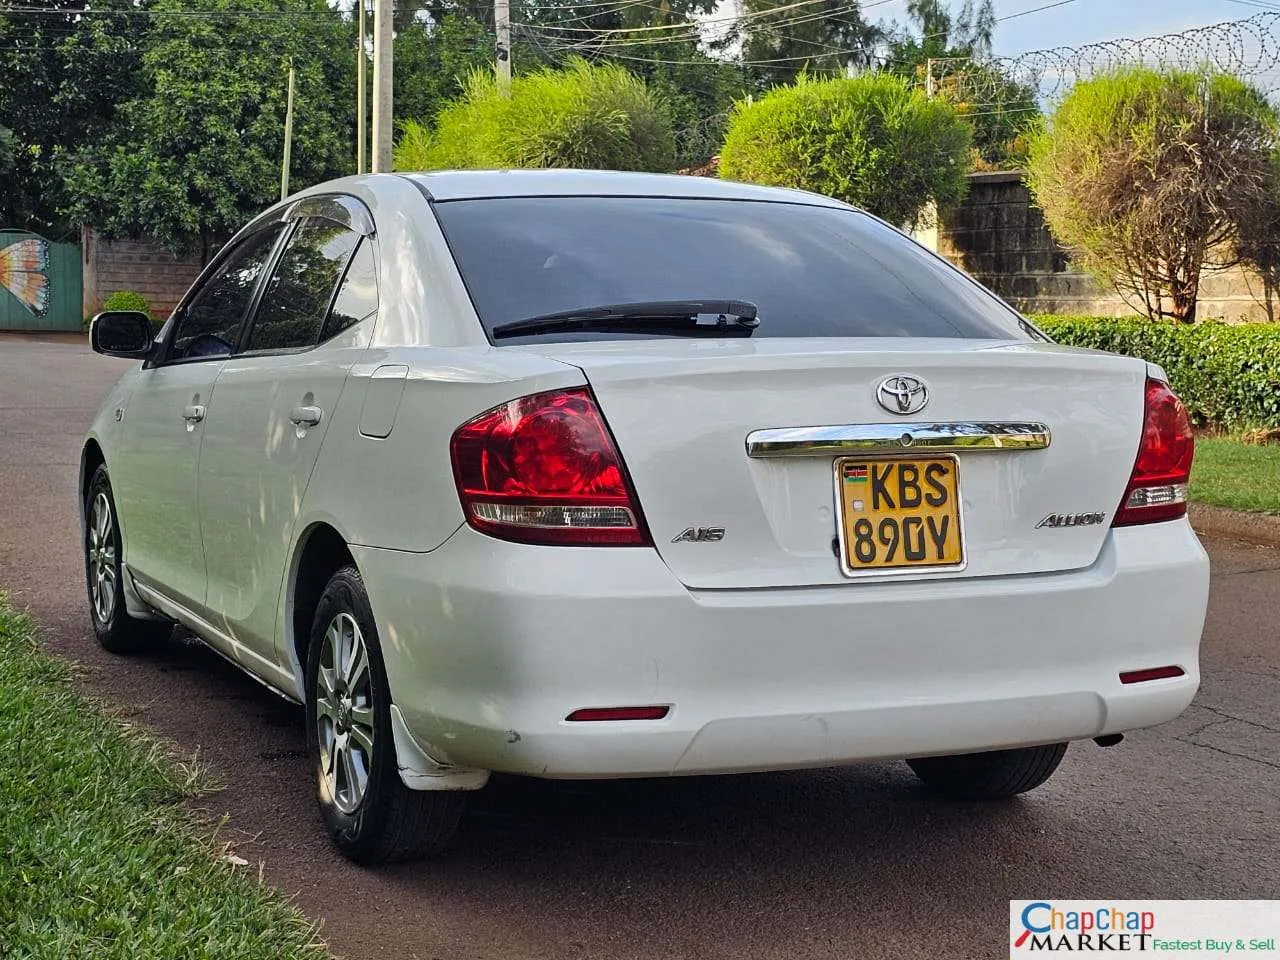 Toyota Allion kenya CLEAN You Pay 30% Deposit 70% INSTALLMENTS Allion for sale in kenya hire purchase installments EXCLUSIVE Trade in OK 🔥